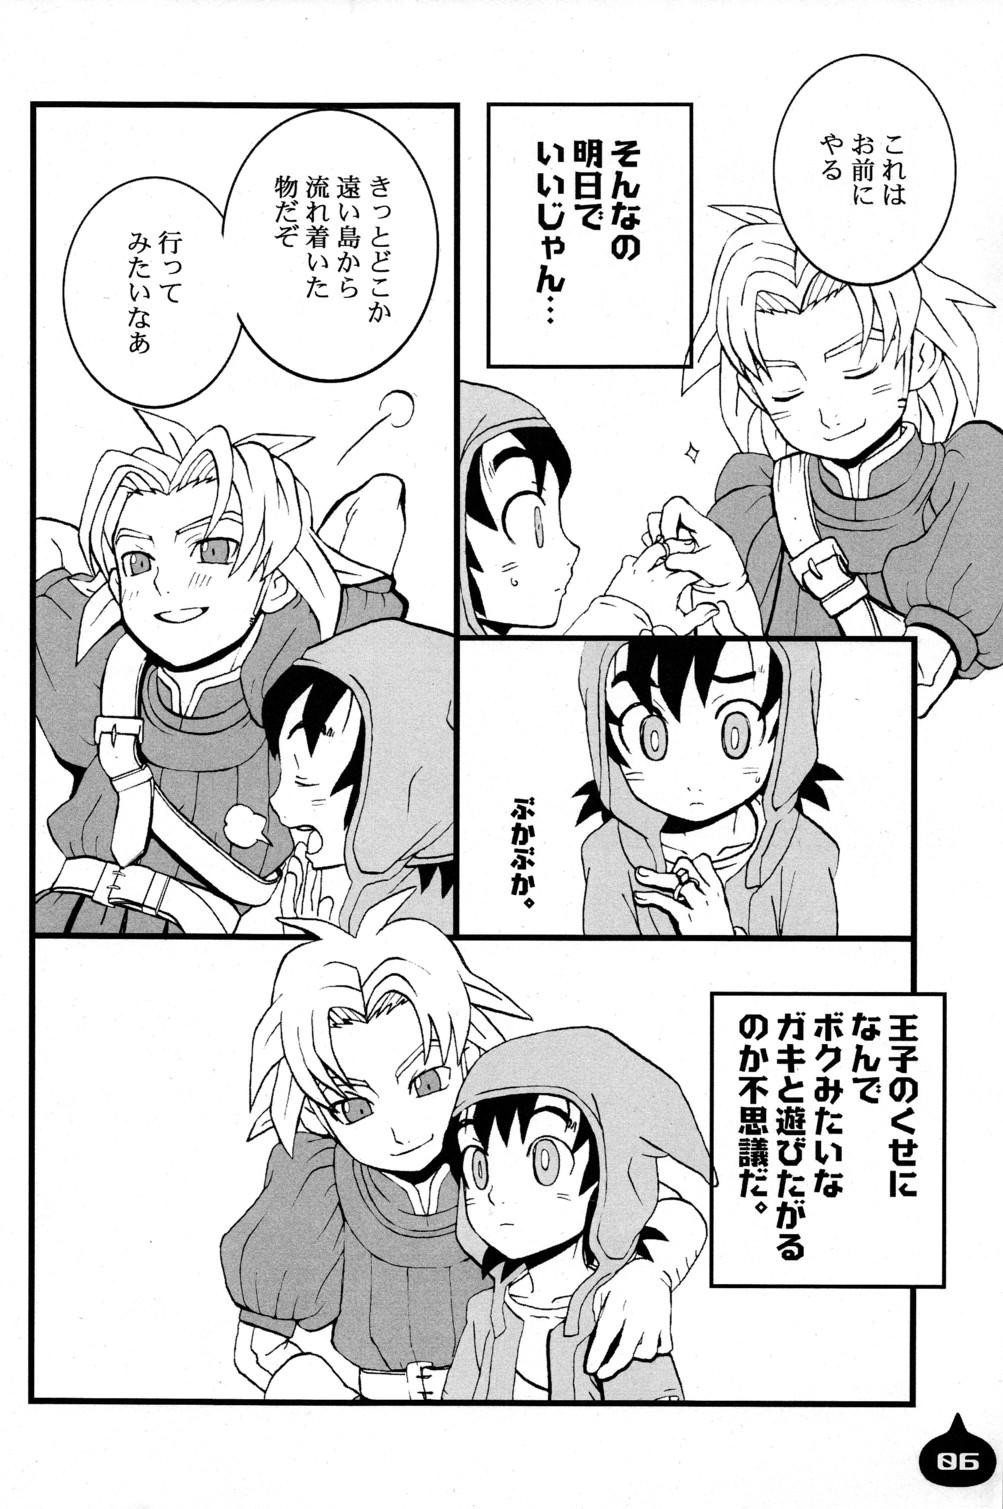 Cocks LITTLE L - Dragon quest vii Lord of lords ryu knight | haou taikei ryuu knight Coroa - Page 6